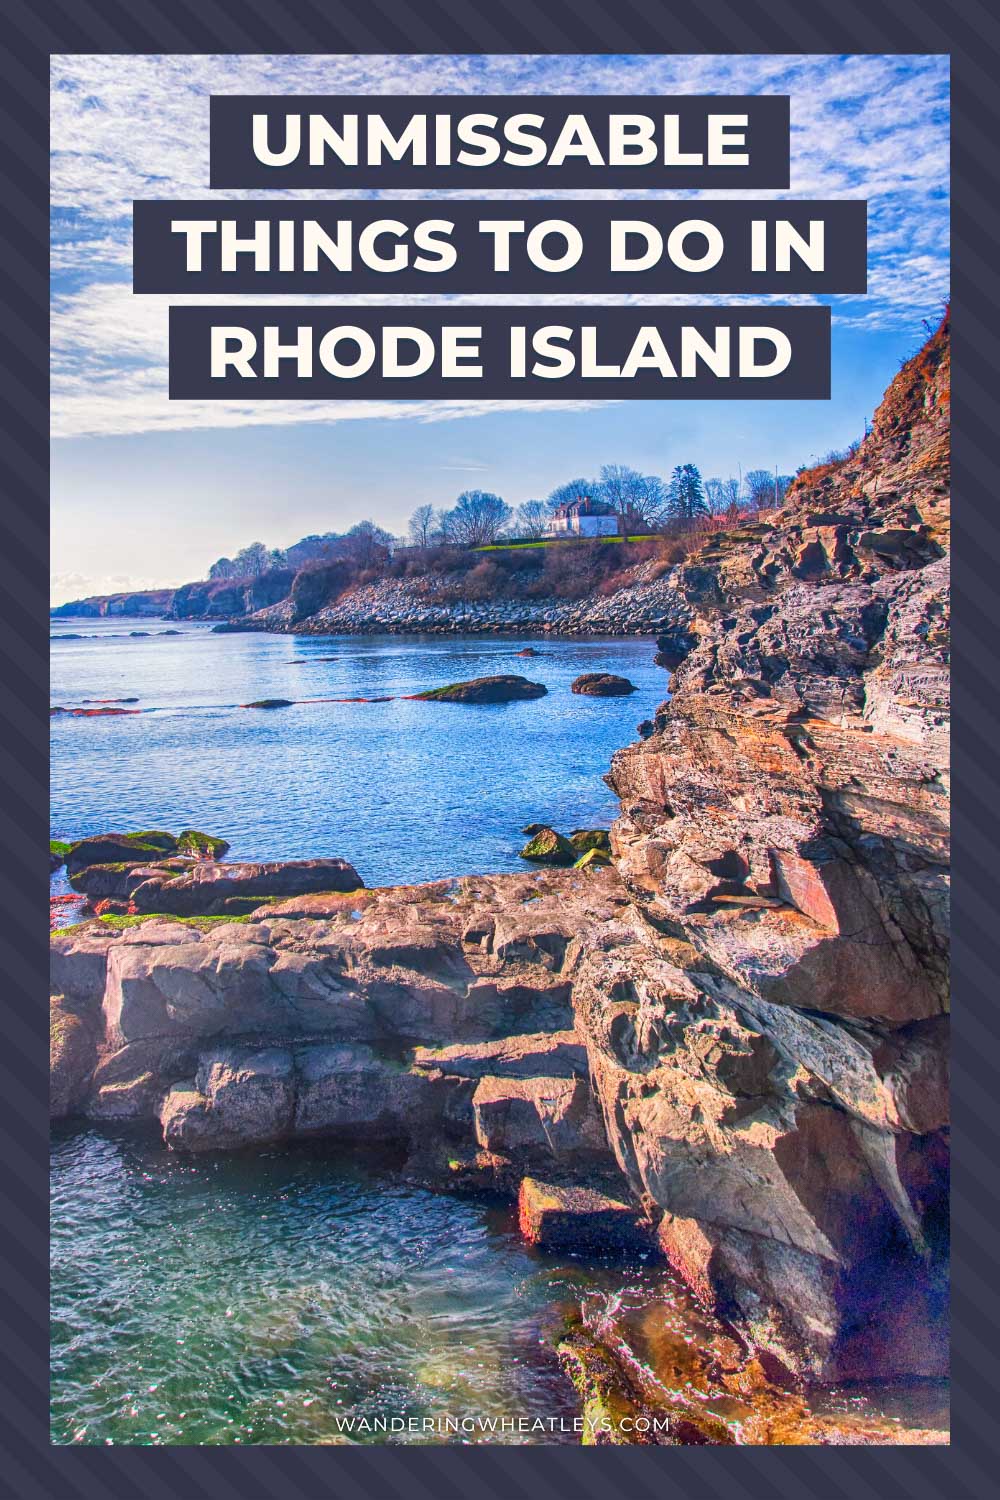 The Best Things to do in Rhode Island